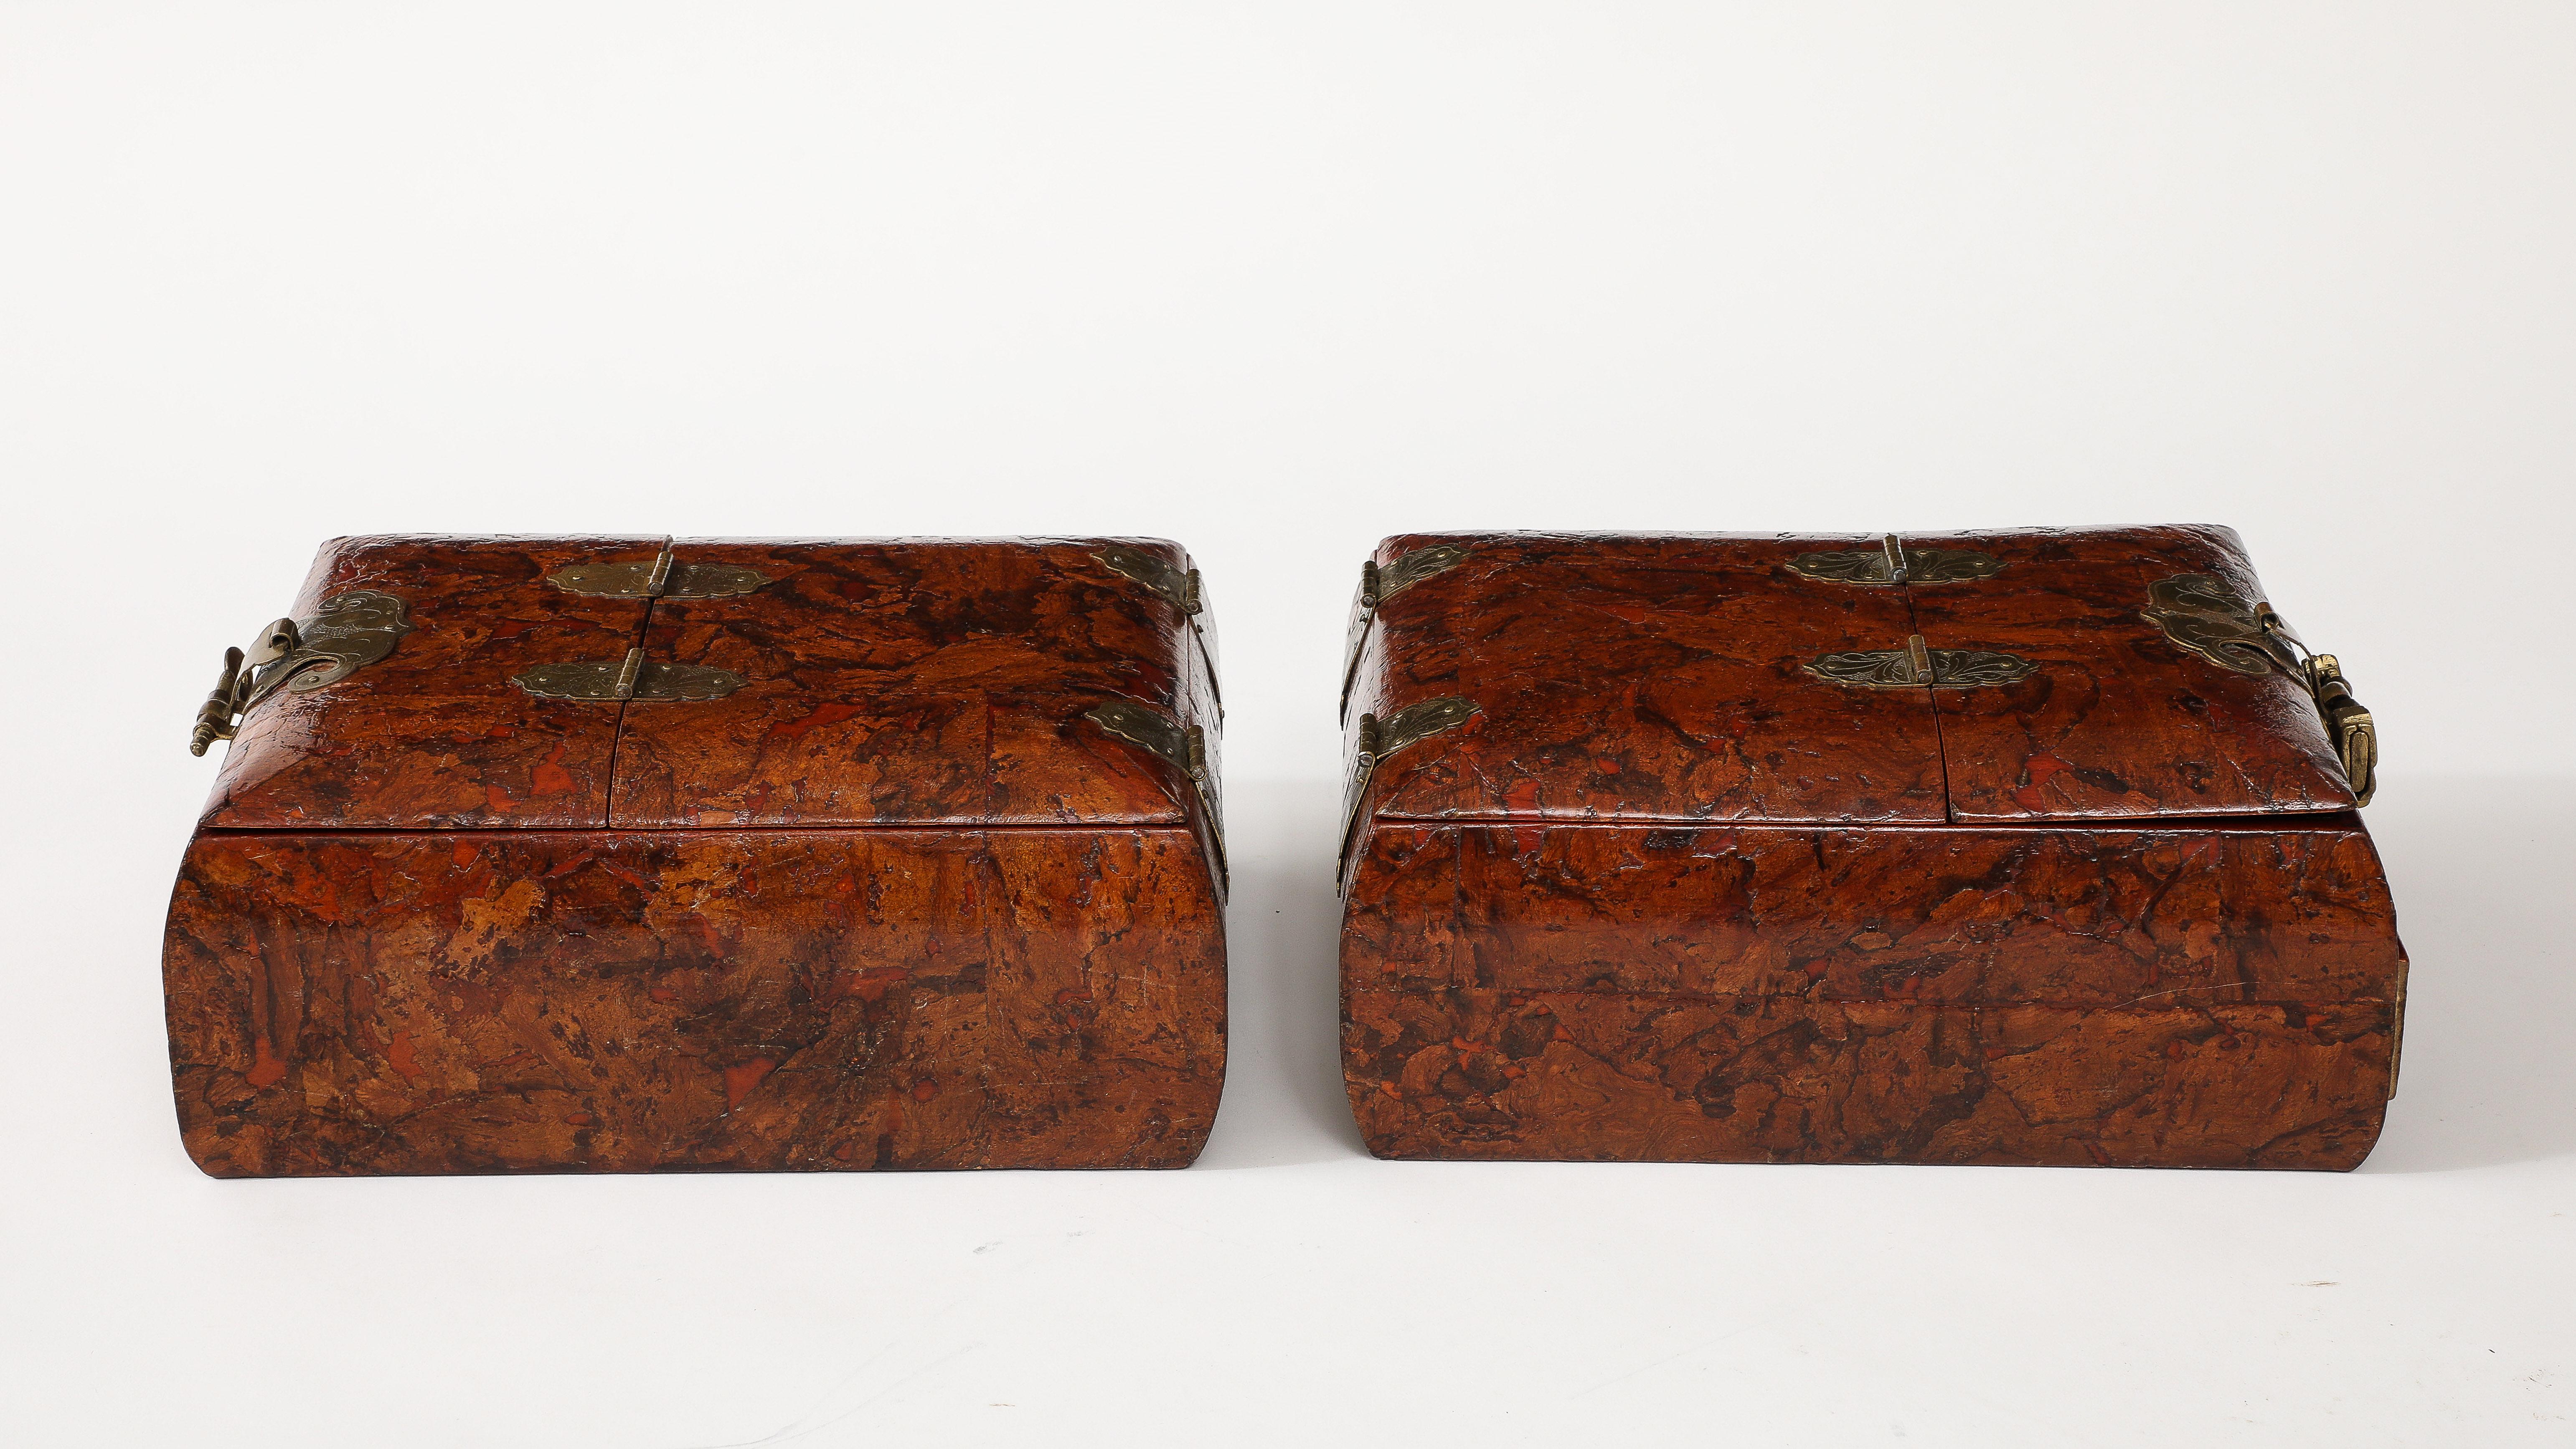 1950's burl-wood and brass Chinese jewelry boxes with mirrors, lightly restored with with minor wear and patina due to age and use. 